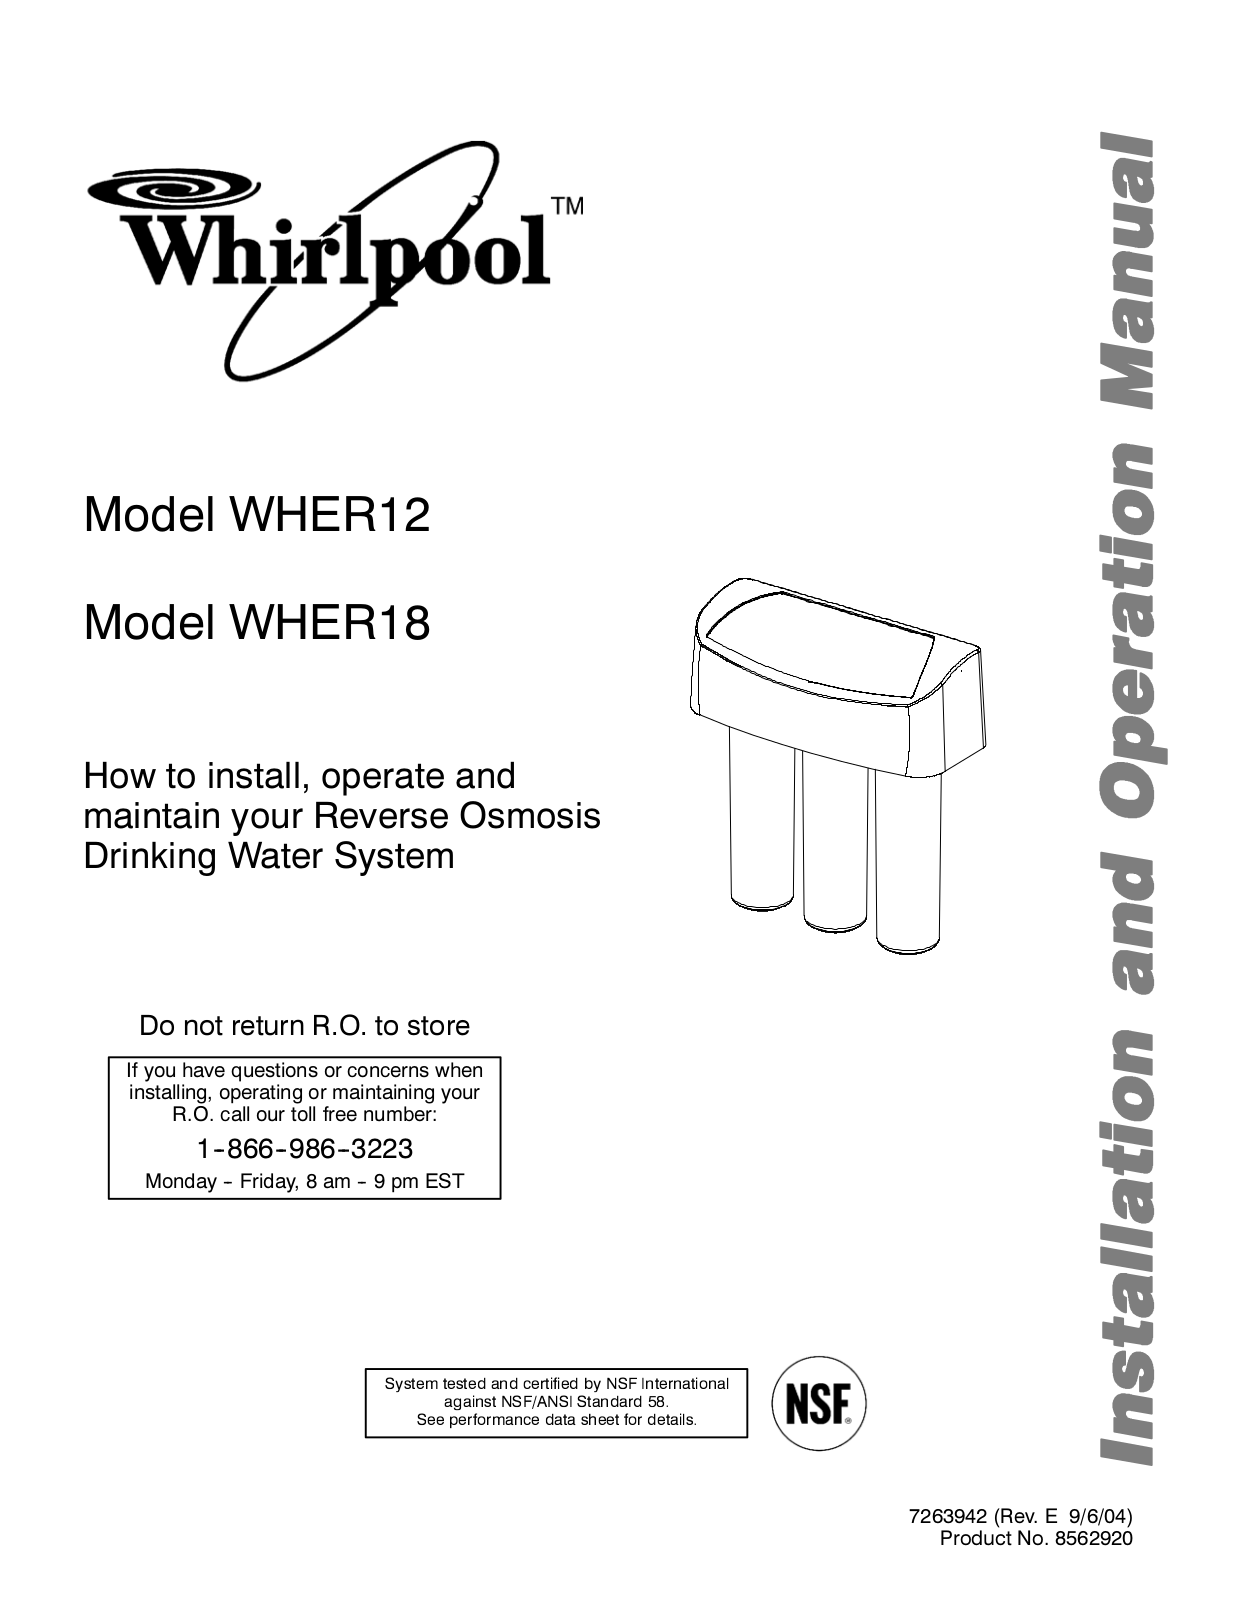 Whirlpool WHER12, WHER18 Owner's Manual